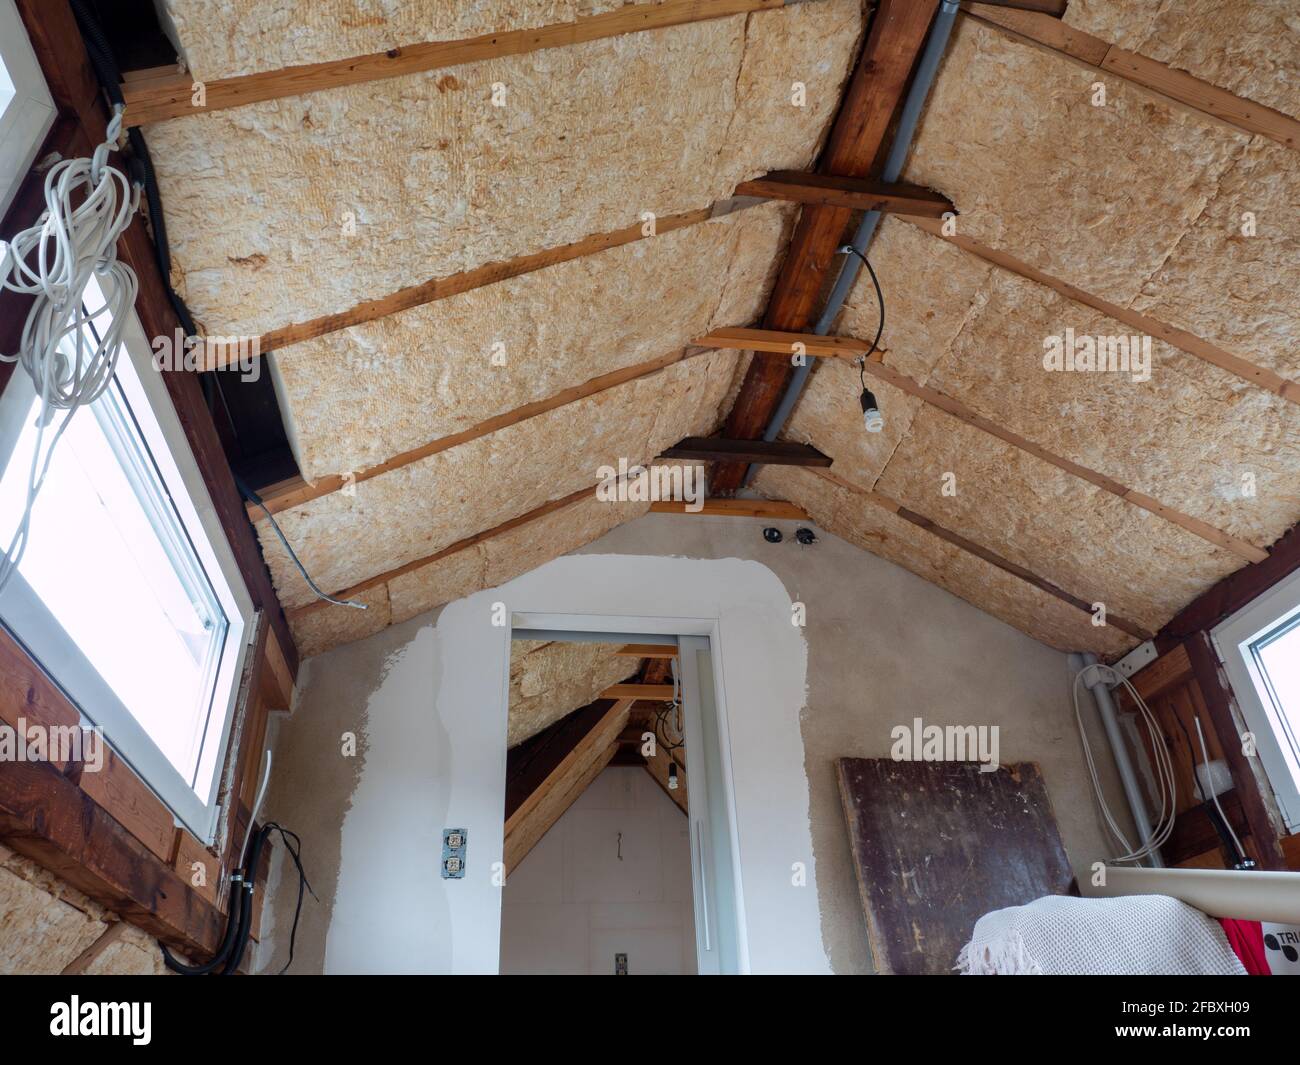 The attic is being renovated in the house Stock Photo